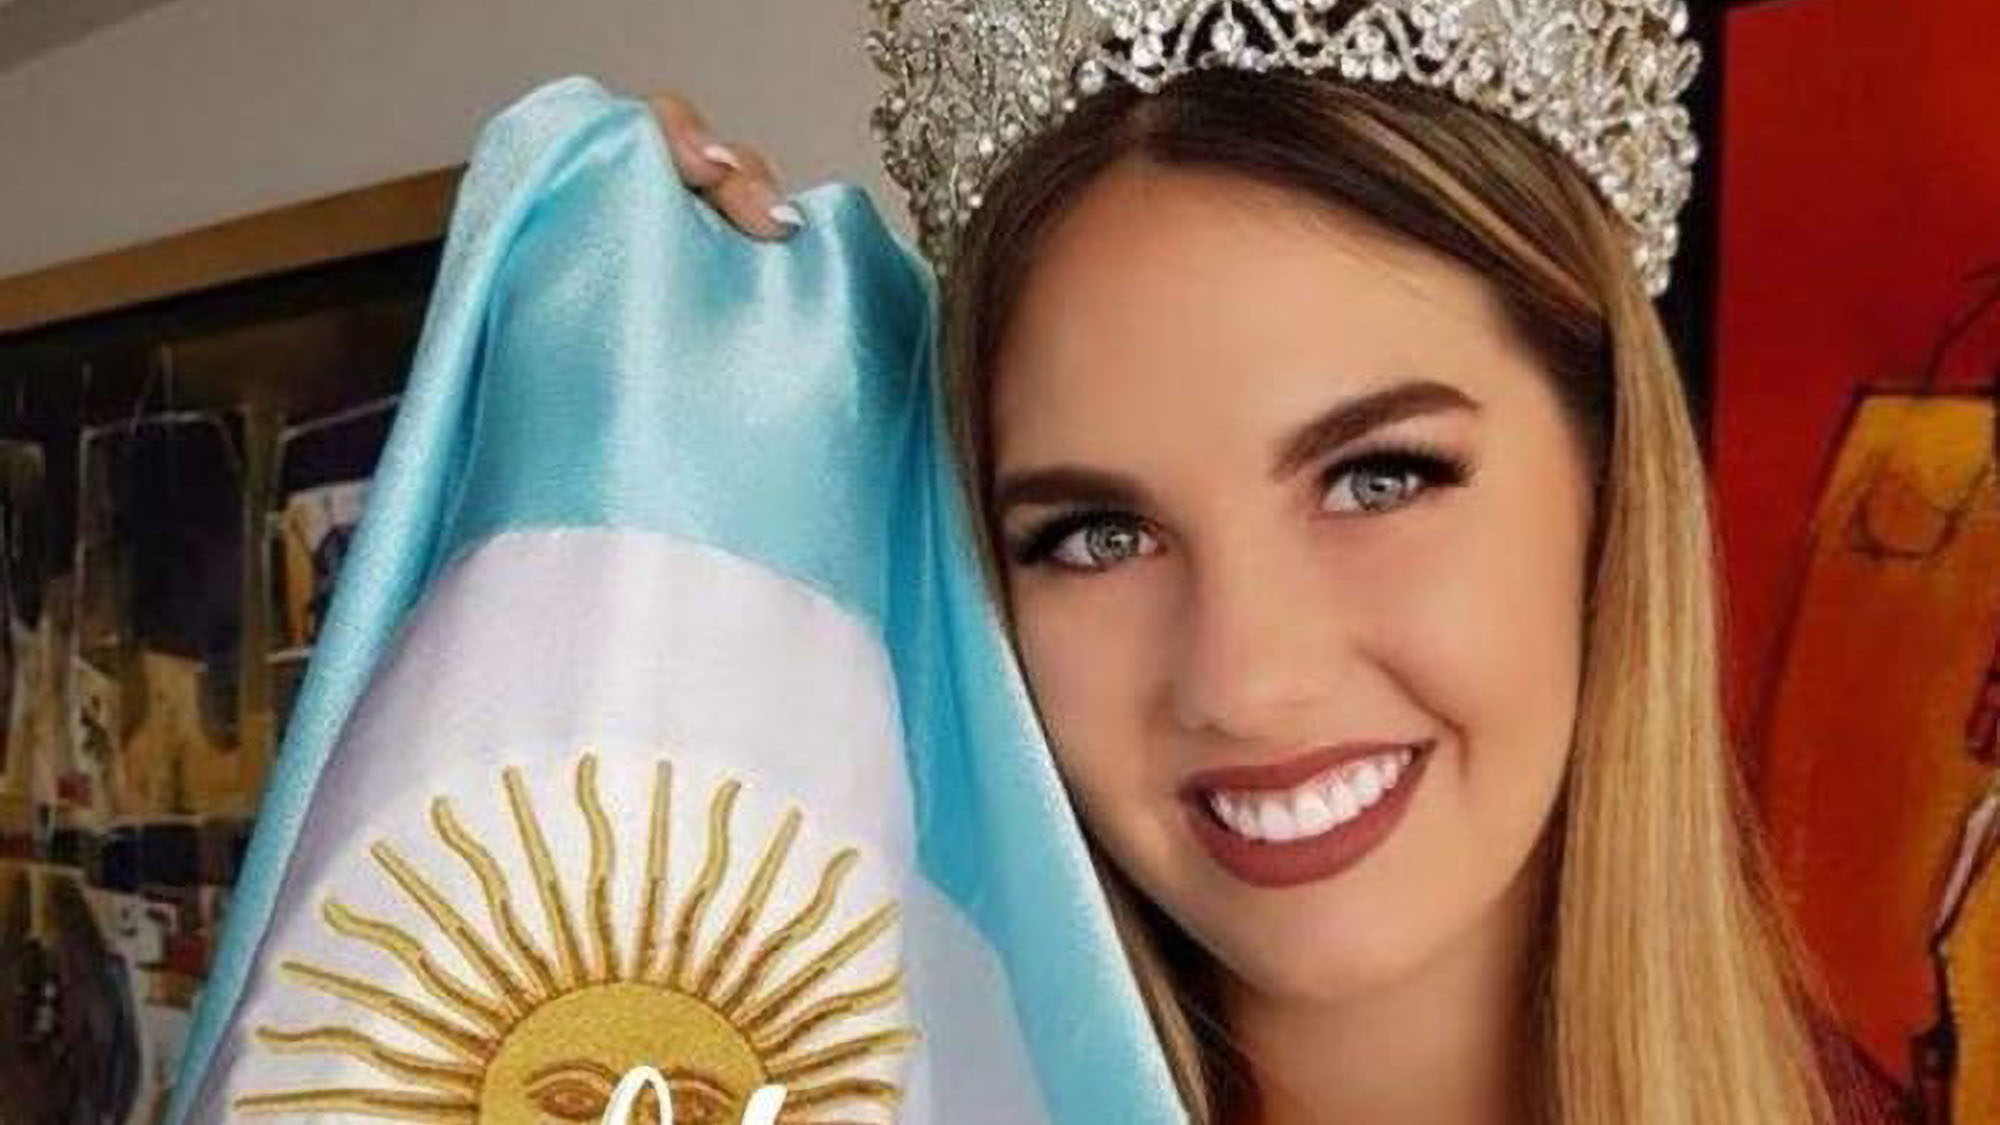 Read more about the article Radio Journalist On Trial After He Threatened Miss Argentina Saying “I’m Going To Burn Your Little Face With Acid”